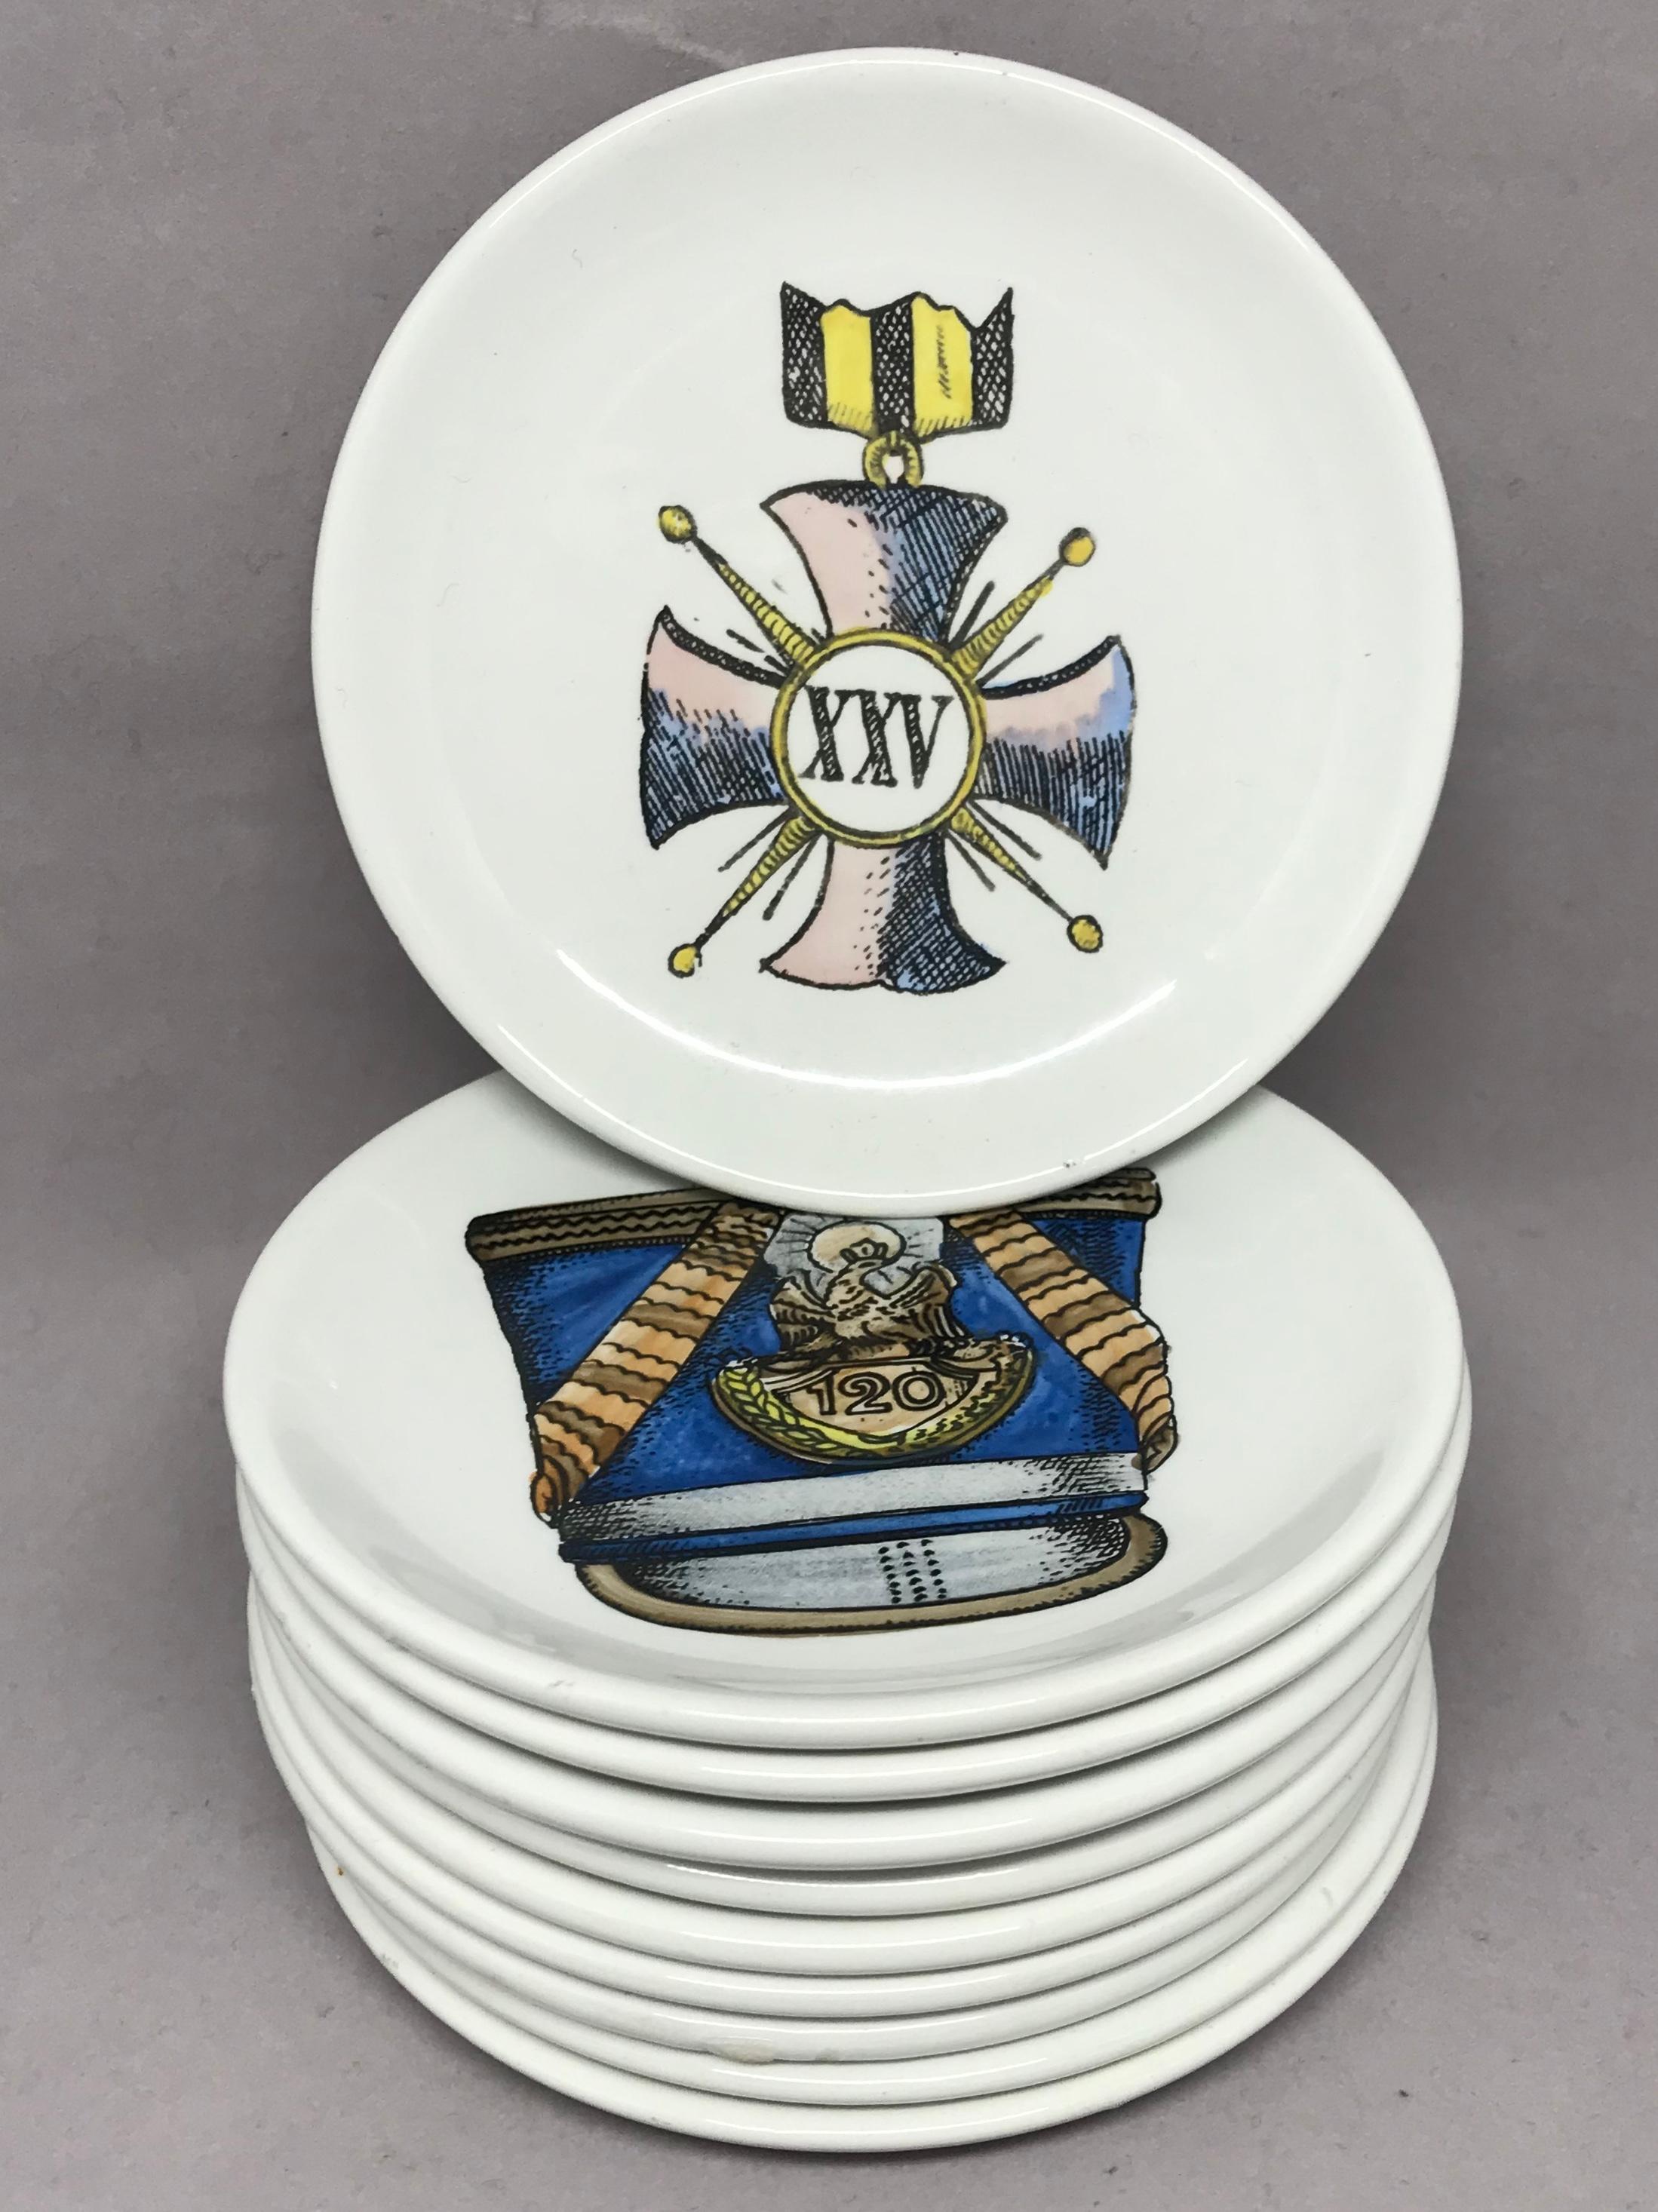 Set of ten vintage Italian porcelain coasters. Ten white drinks coasters with various hand-painted military hats and decorations, each marked Bucciarelli, Milano. Italy, circa 1960.
Dimensions: 4.25